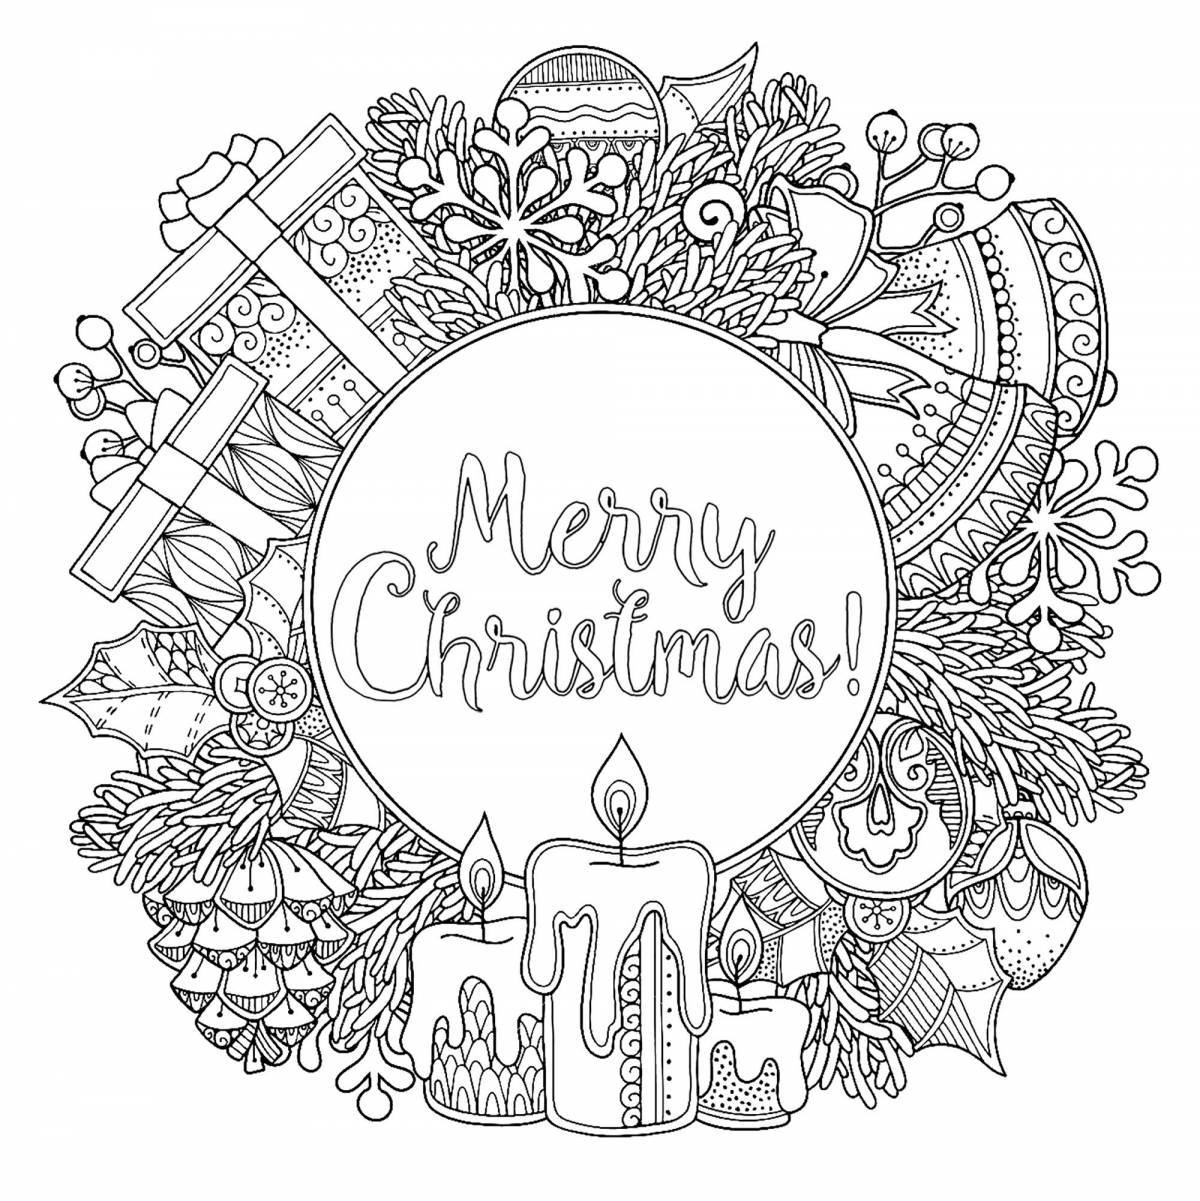 Coloring page delightful Christmas wreath